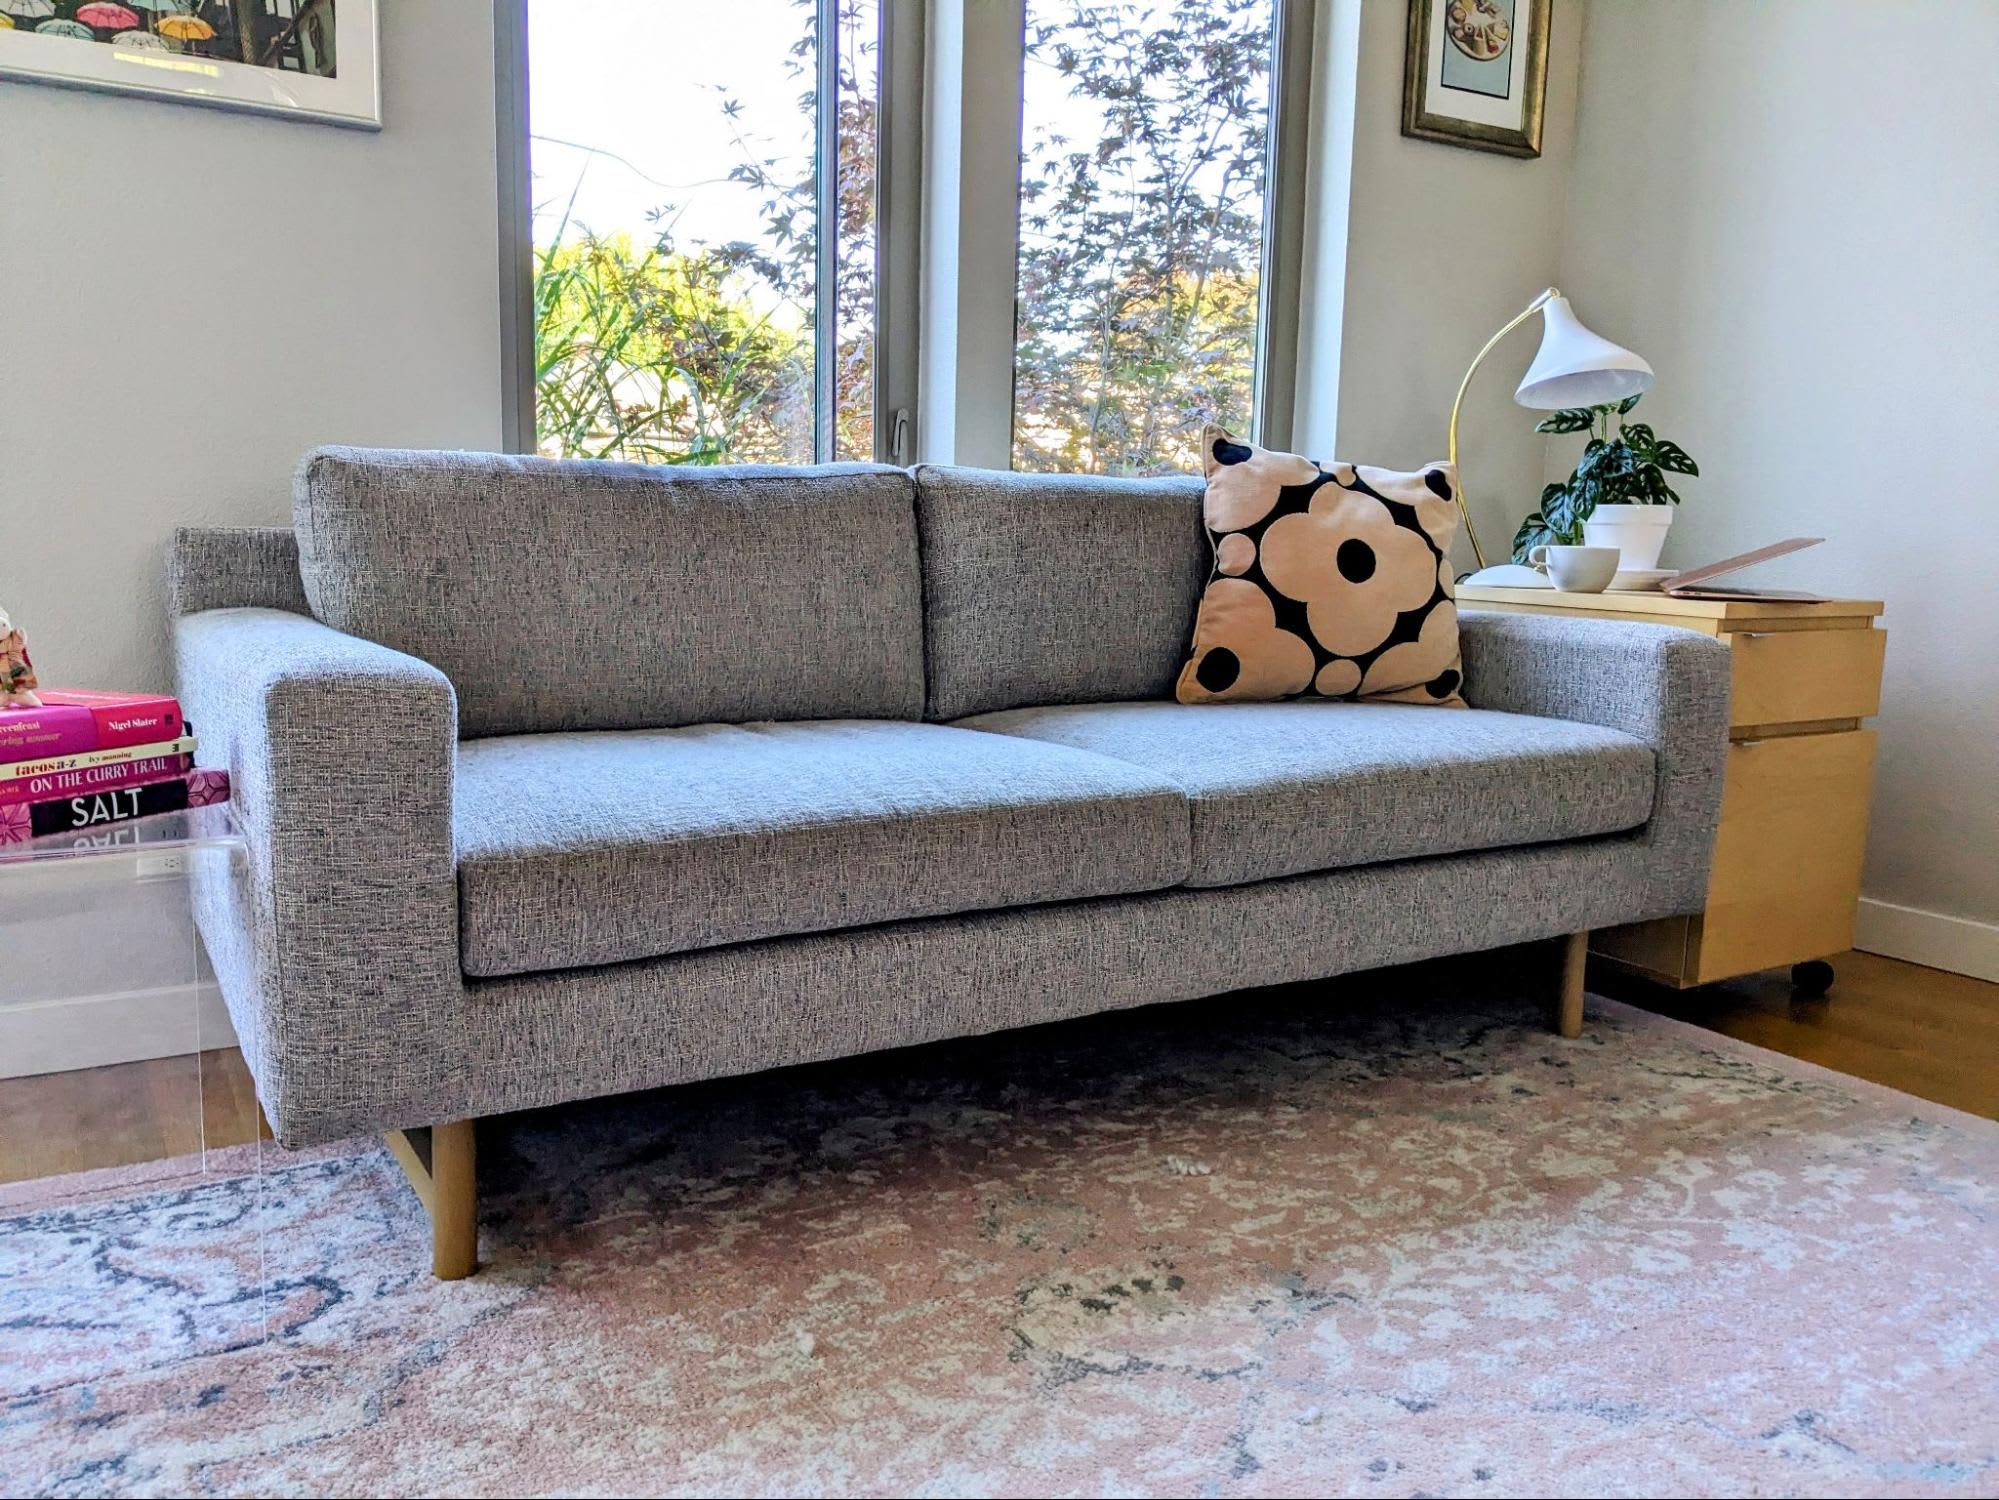 West Elm Sofa Review - Why You Should Never Order a West Elm Couch